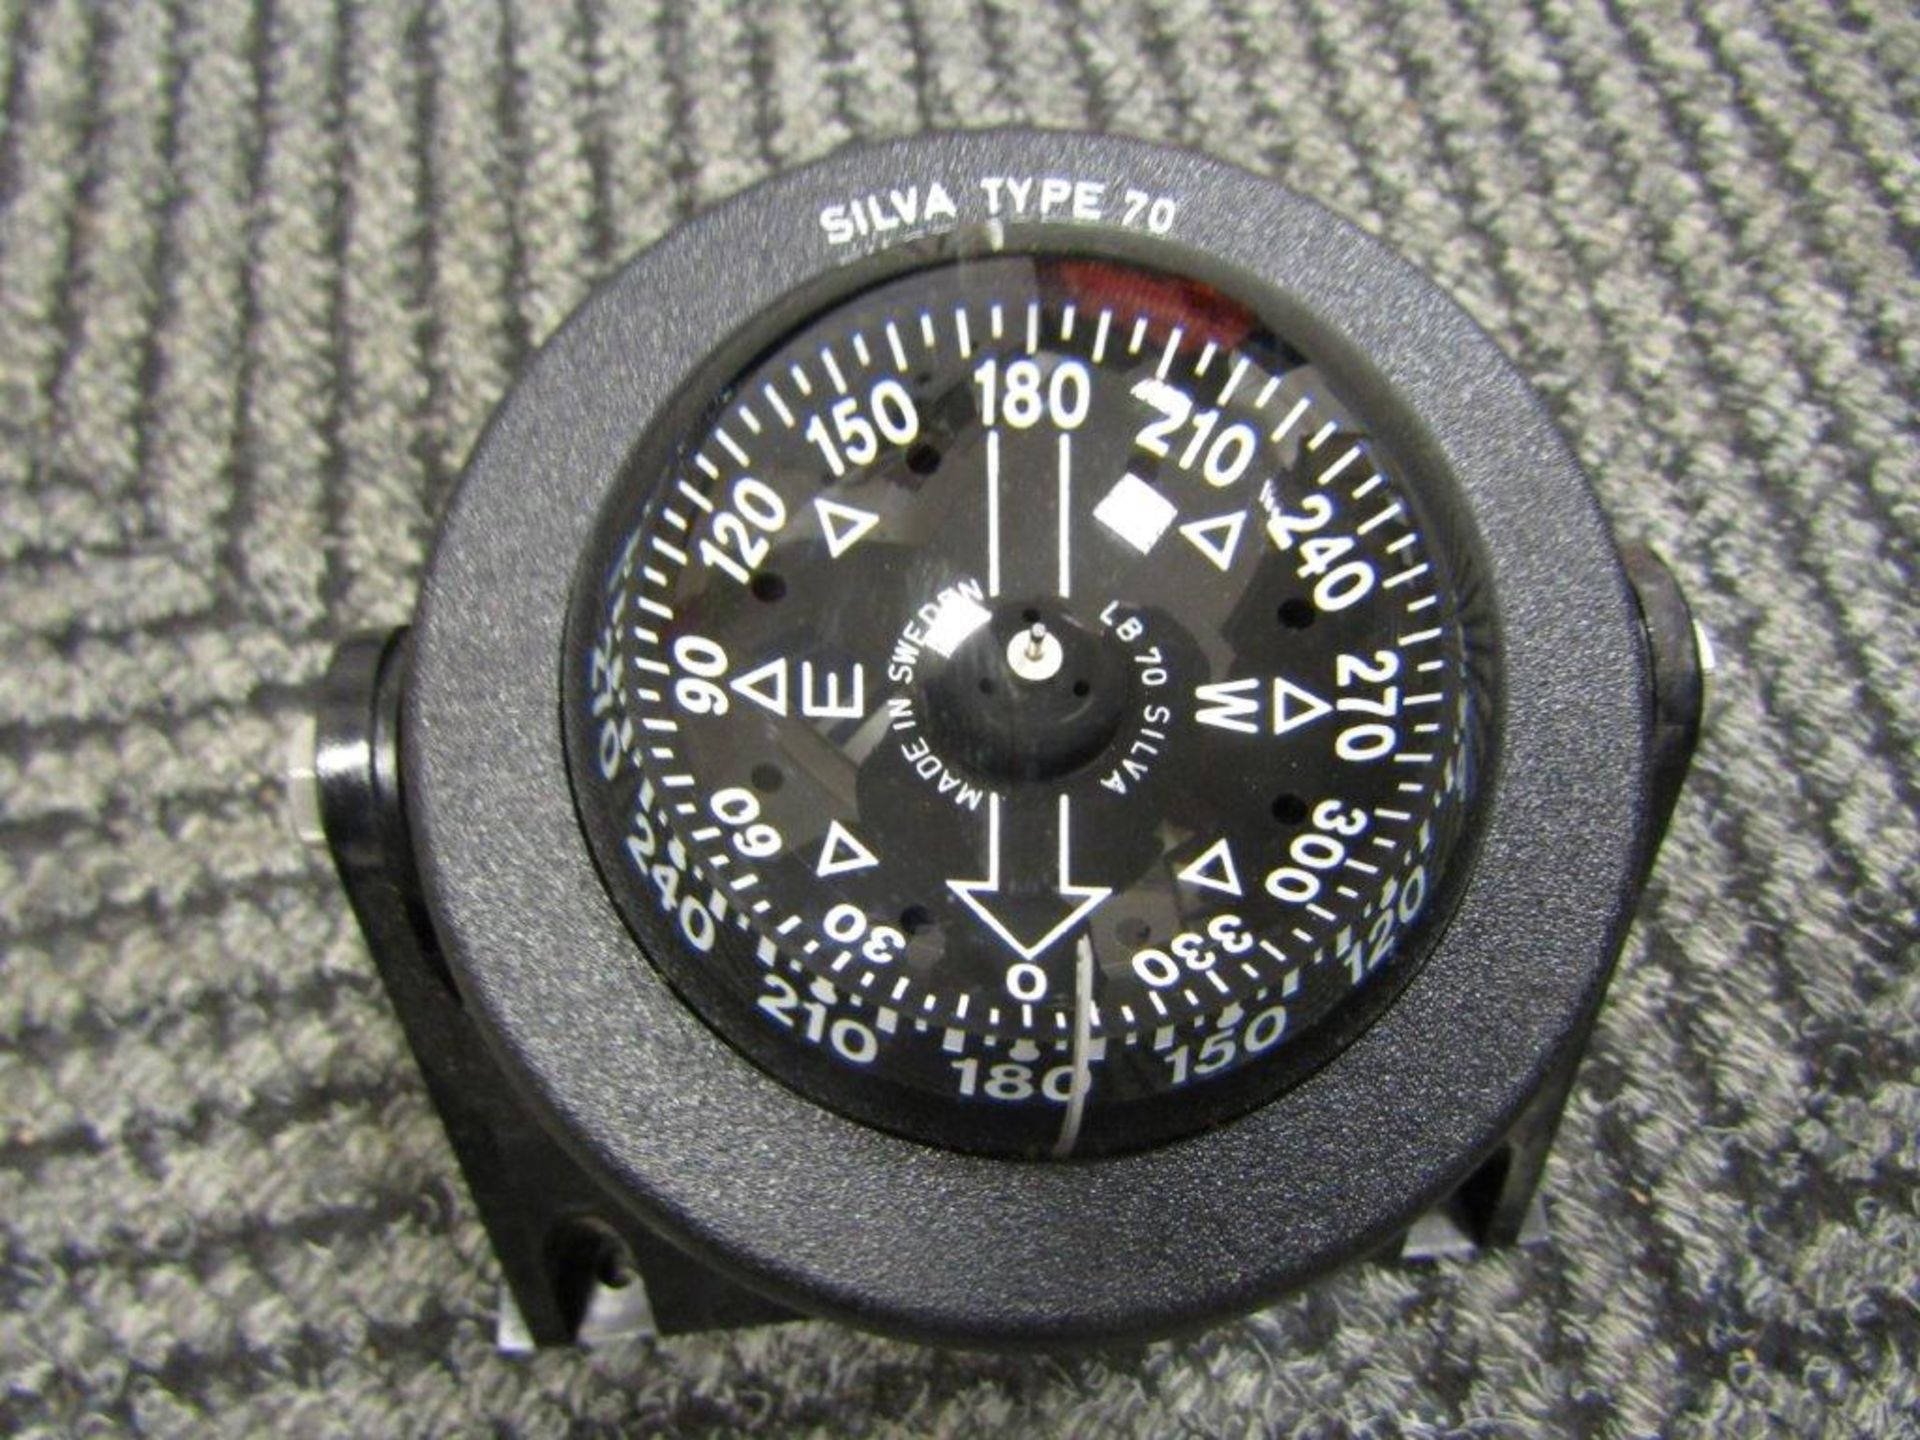 Hagglunds BV206 Silva Type 70 Vehicle Compass - Image 2 of 5